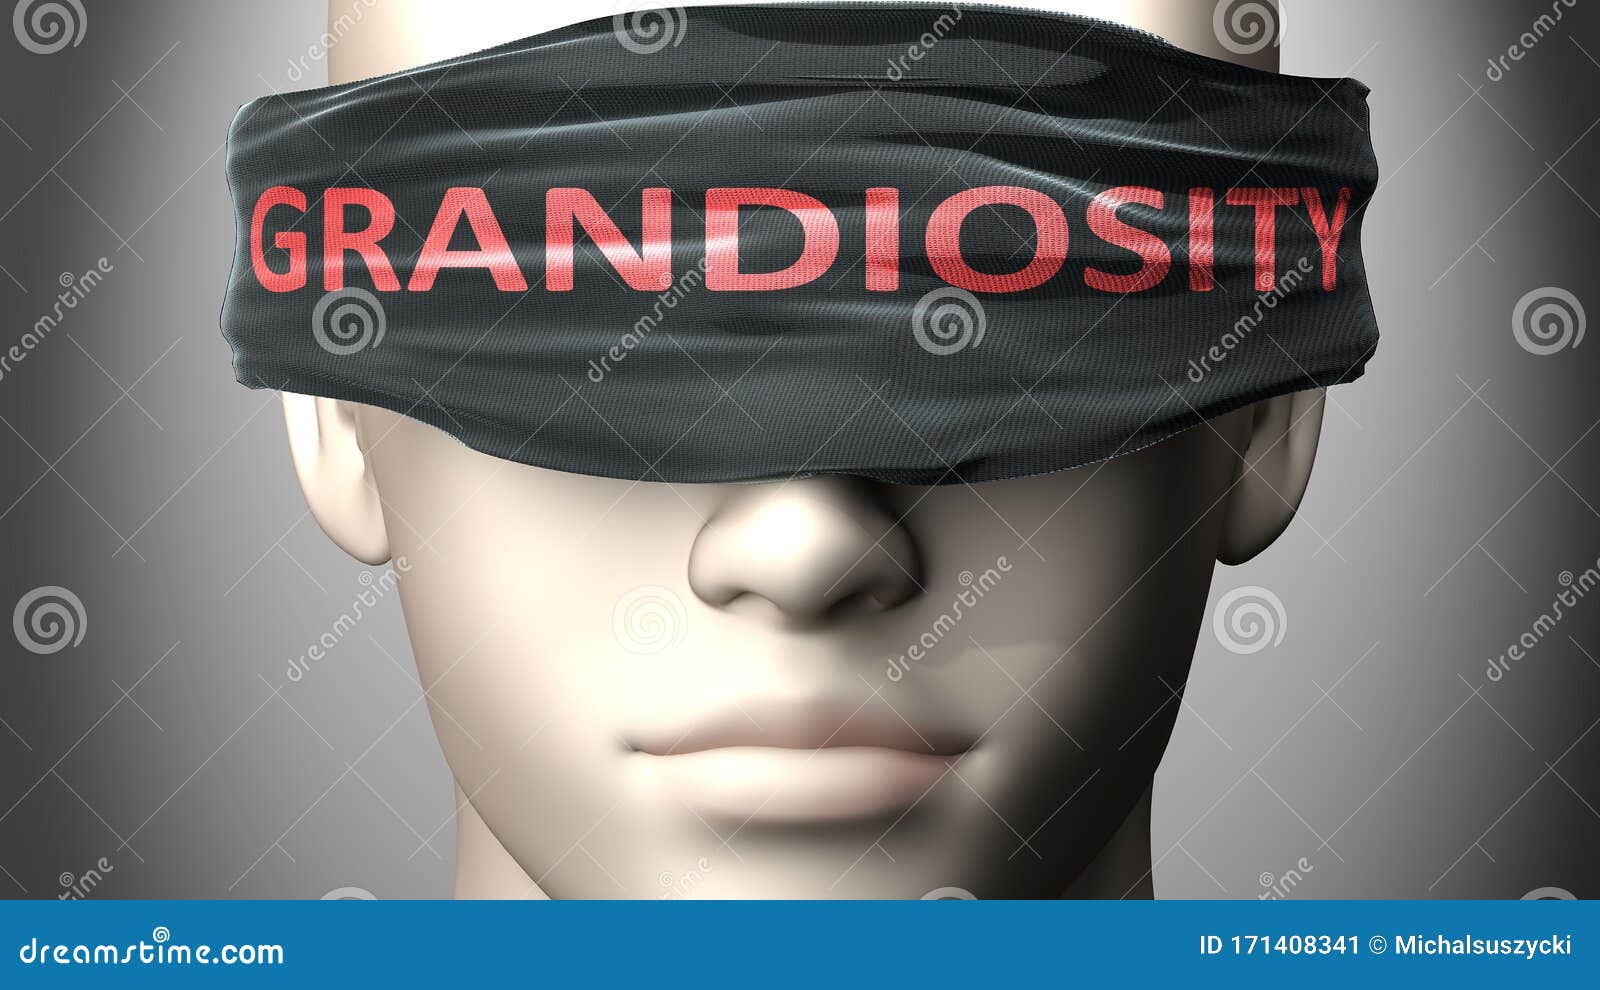 grandiosity can make things harder to see or makes us blind to the reality - pictured as word grandiosity on a blindfold to